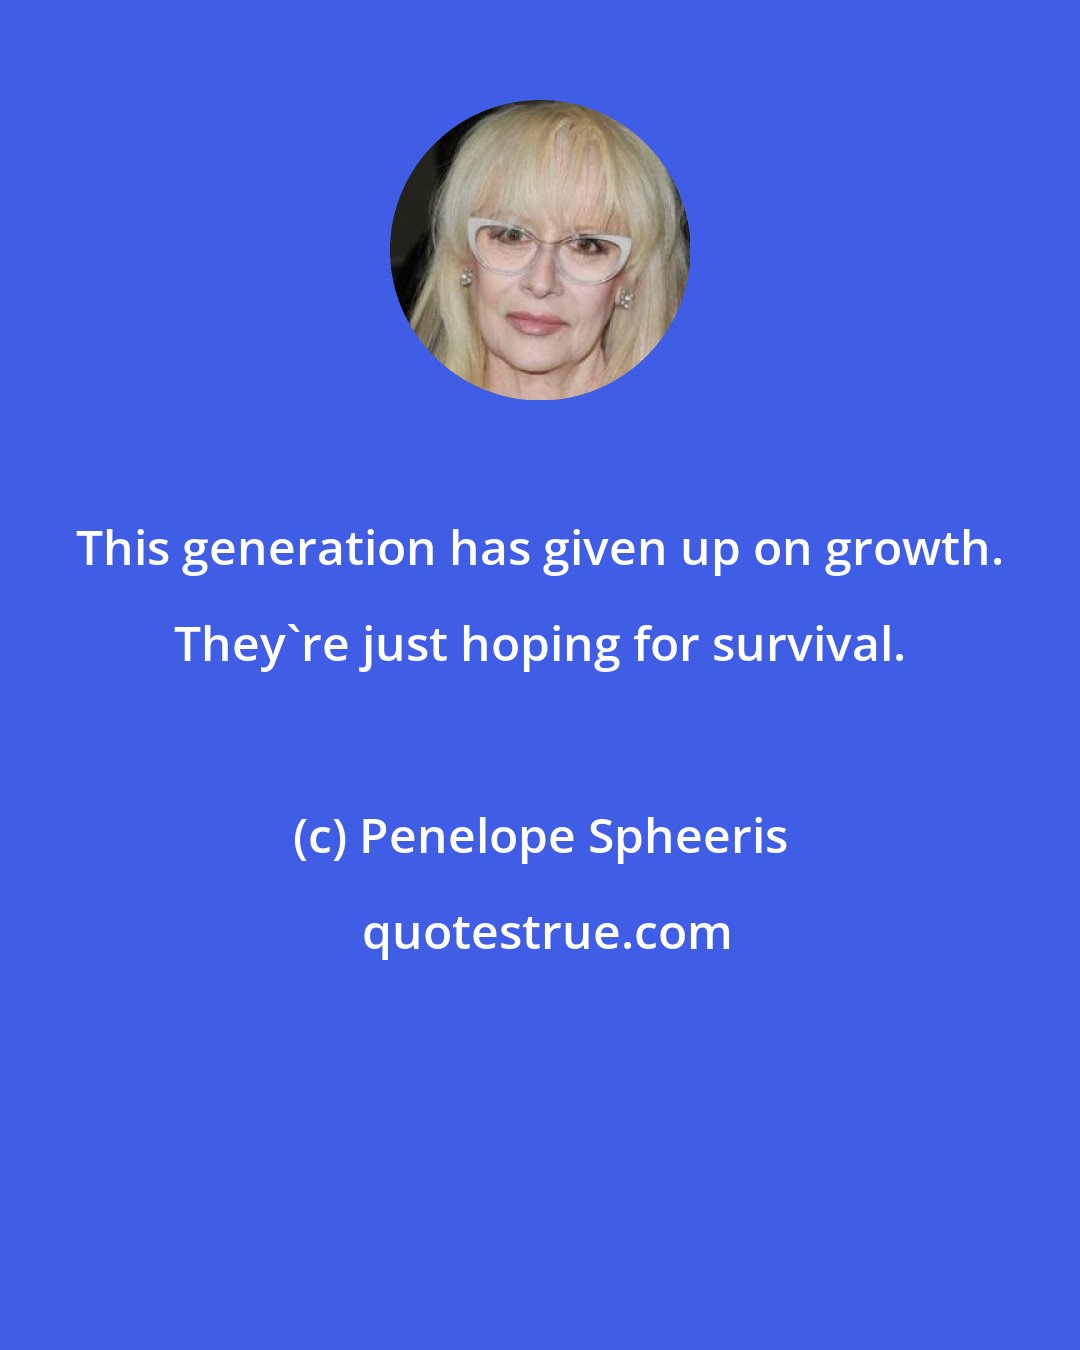 Penelope Spheeris: This generation has given up on growth. They're just hoping for survival.